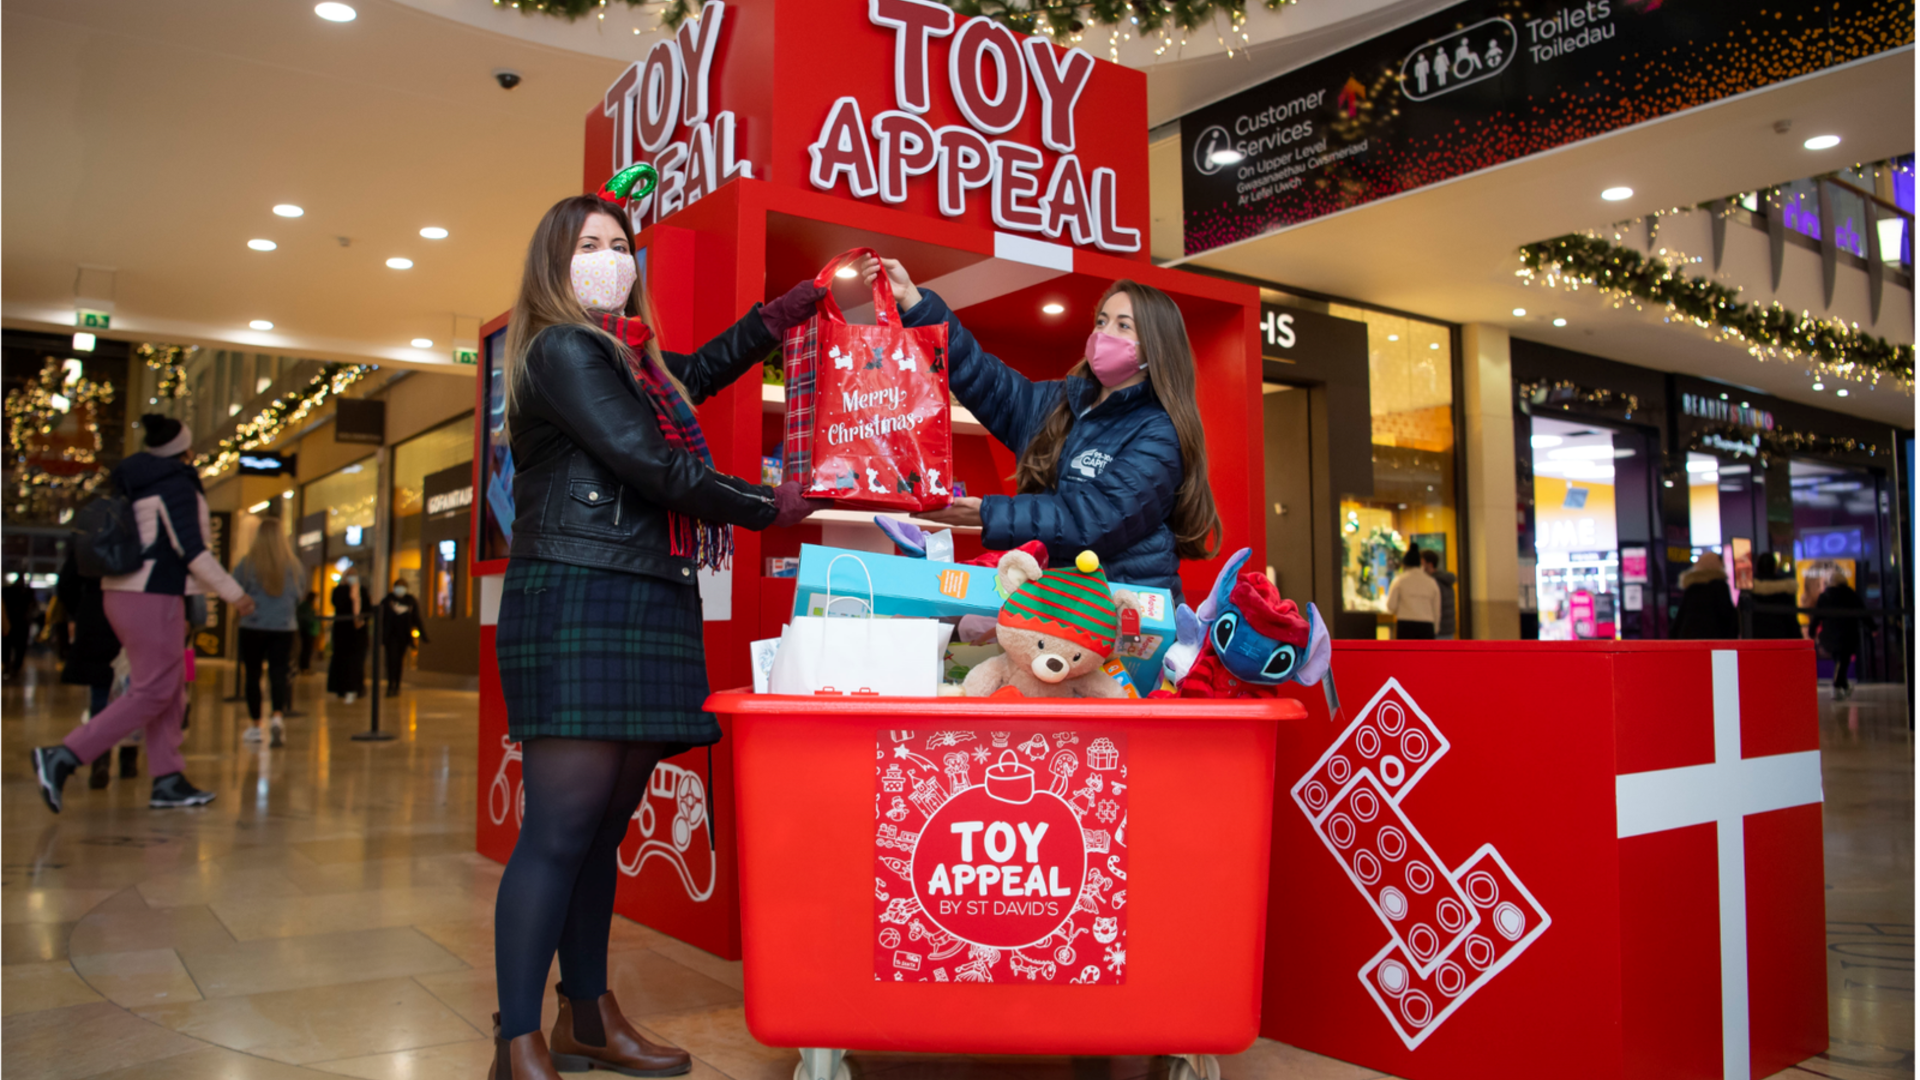 Toy appeal